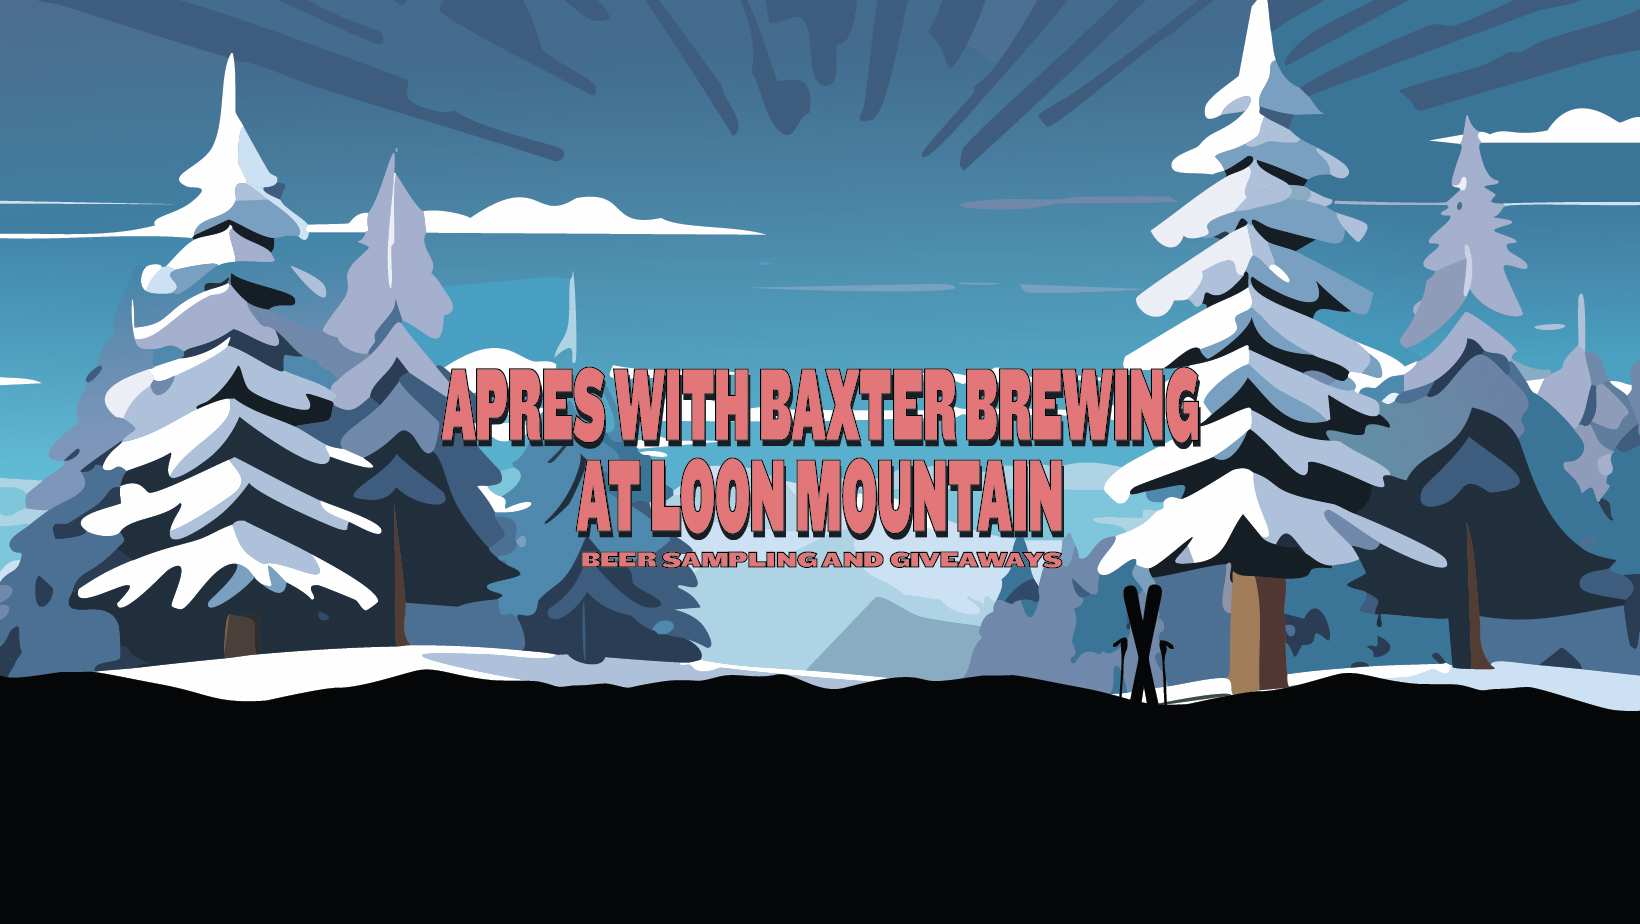 image promoting an apres ski event at Loon Mountain